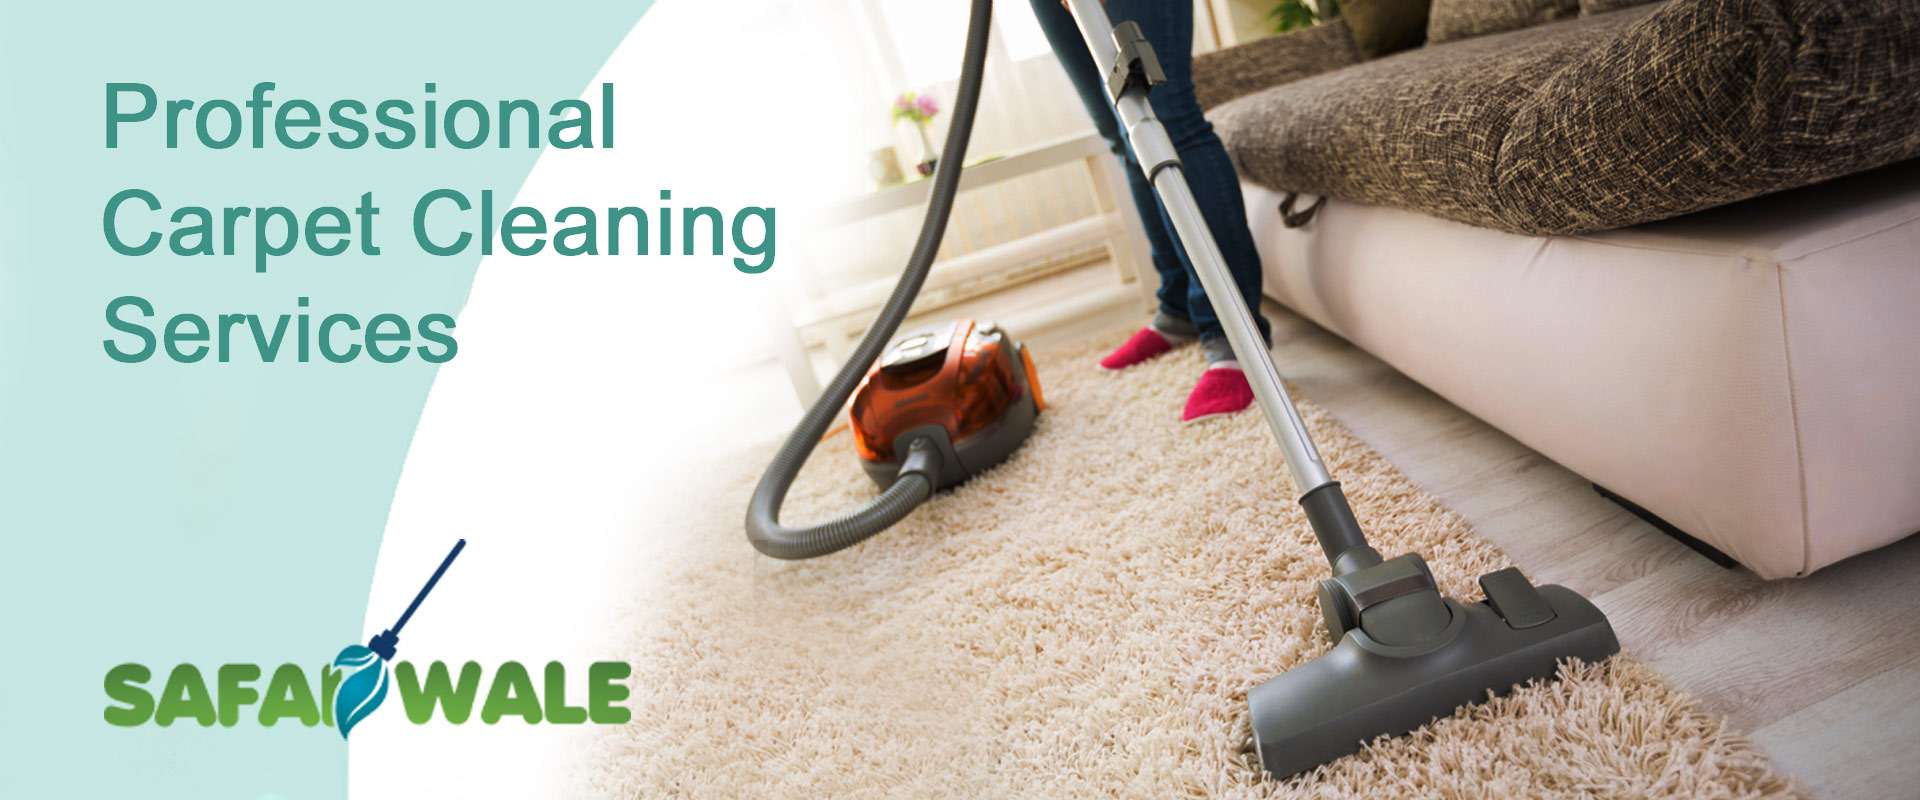 Carpet Cleaning Services In Thane West